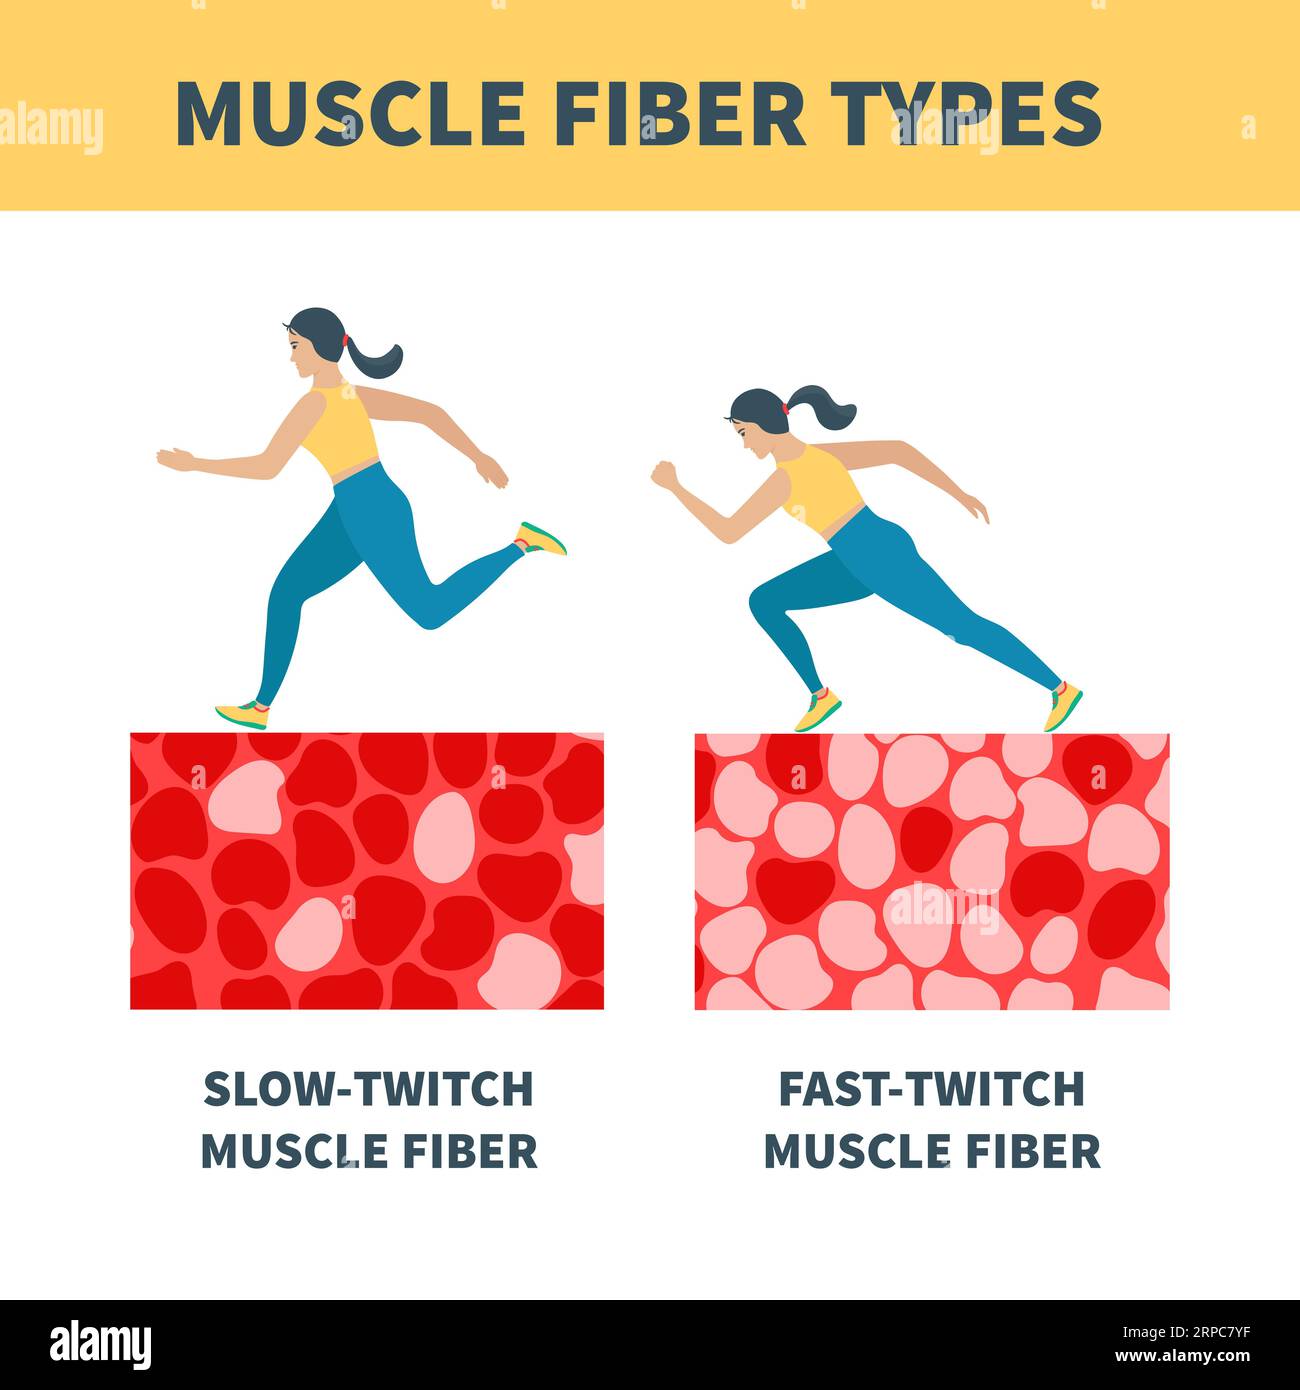 Slow twitch and fast twitch muscle fiber types illustration Stock Vector